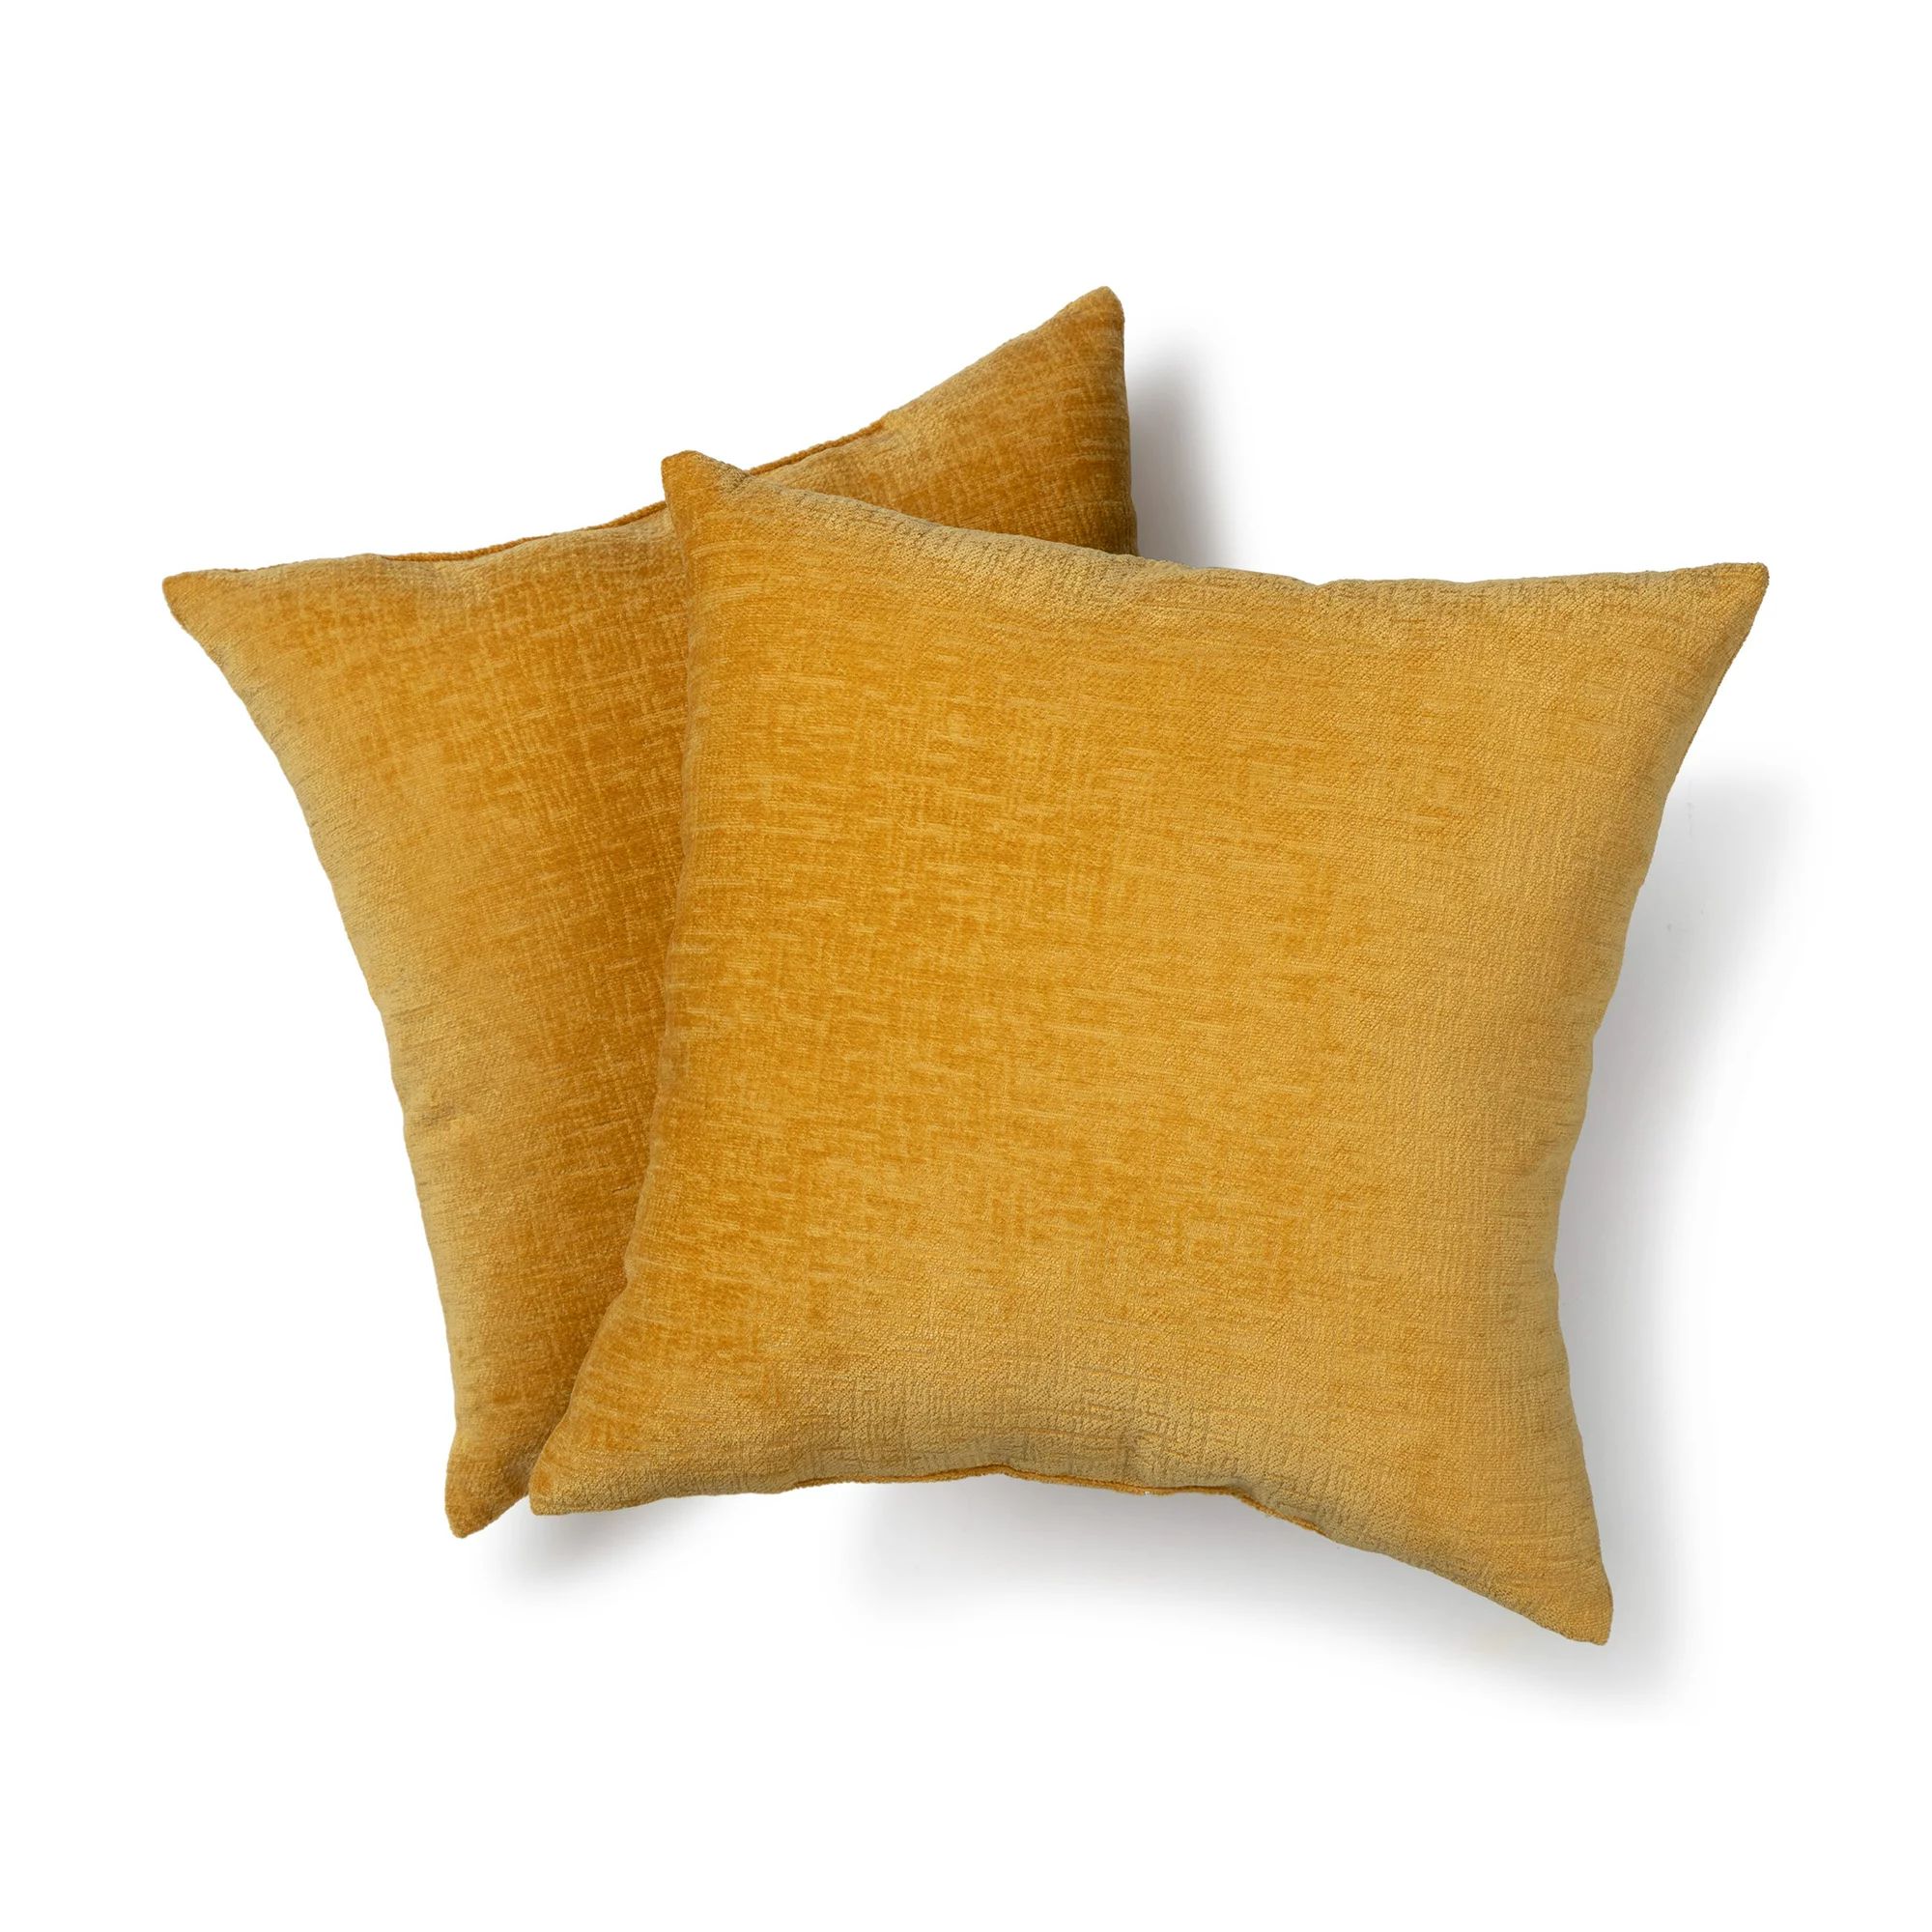 Mainstays, Chenille Decorative Square Pillow, 18" x 18", Yellow, 2 Pack | Walmart (US)